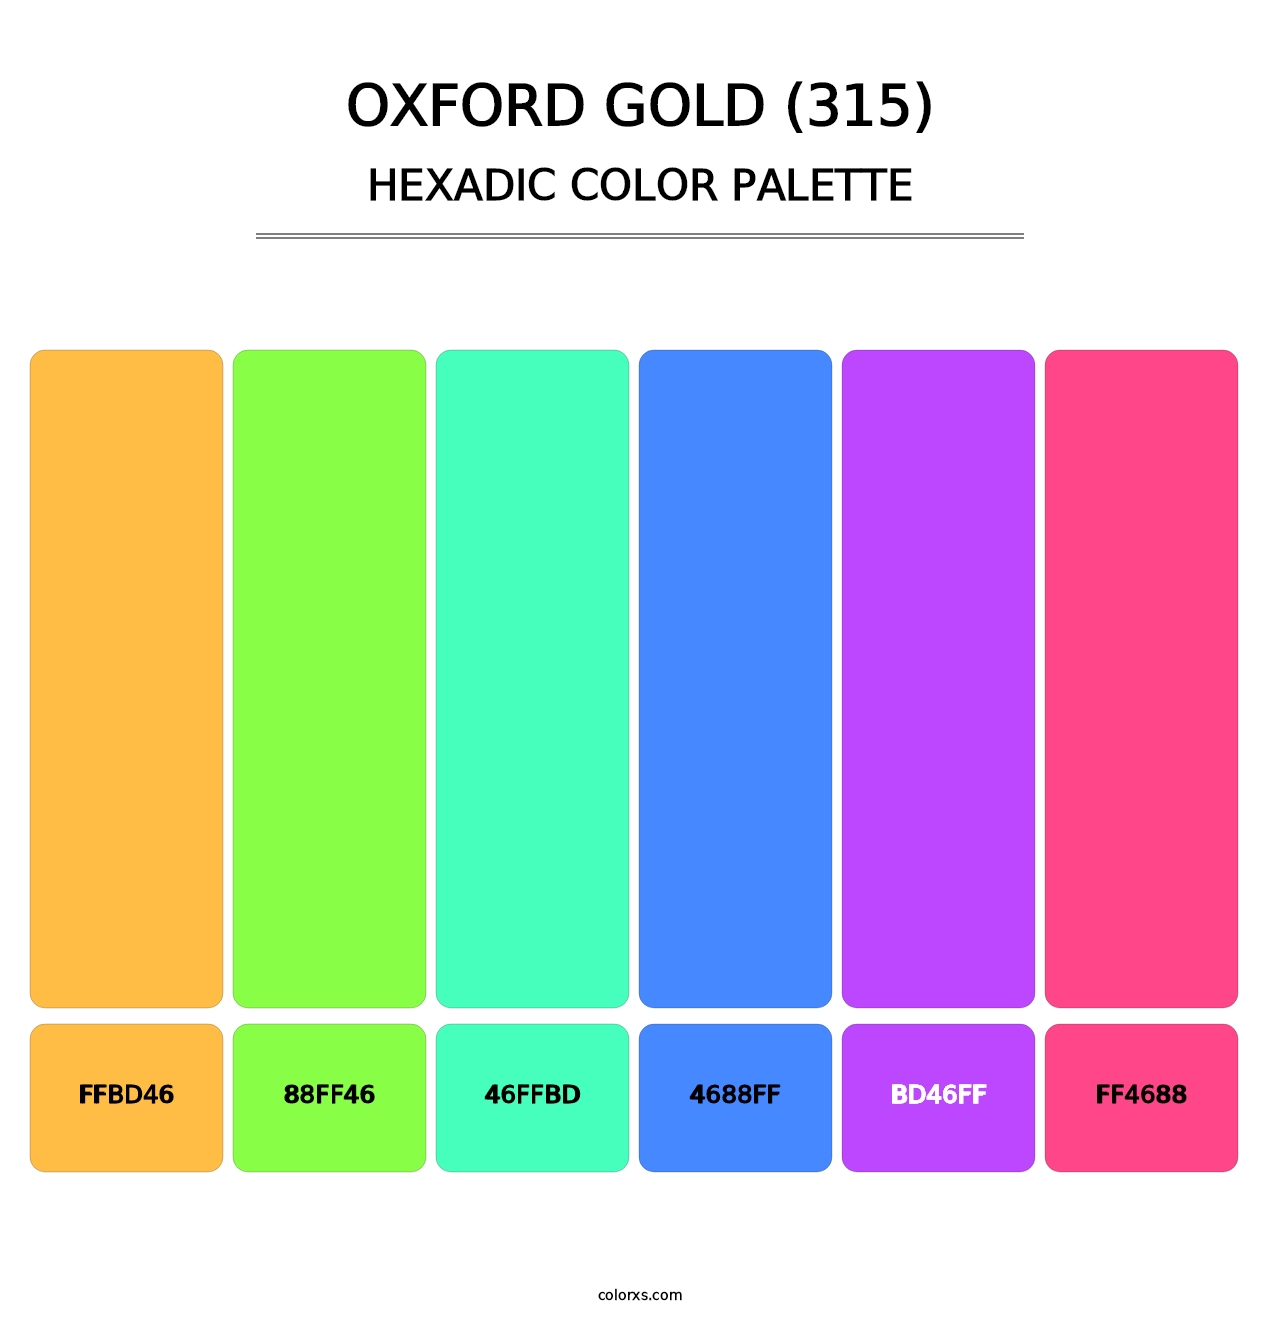 Oxford Gold (315) - Hexadic Color Palette